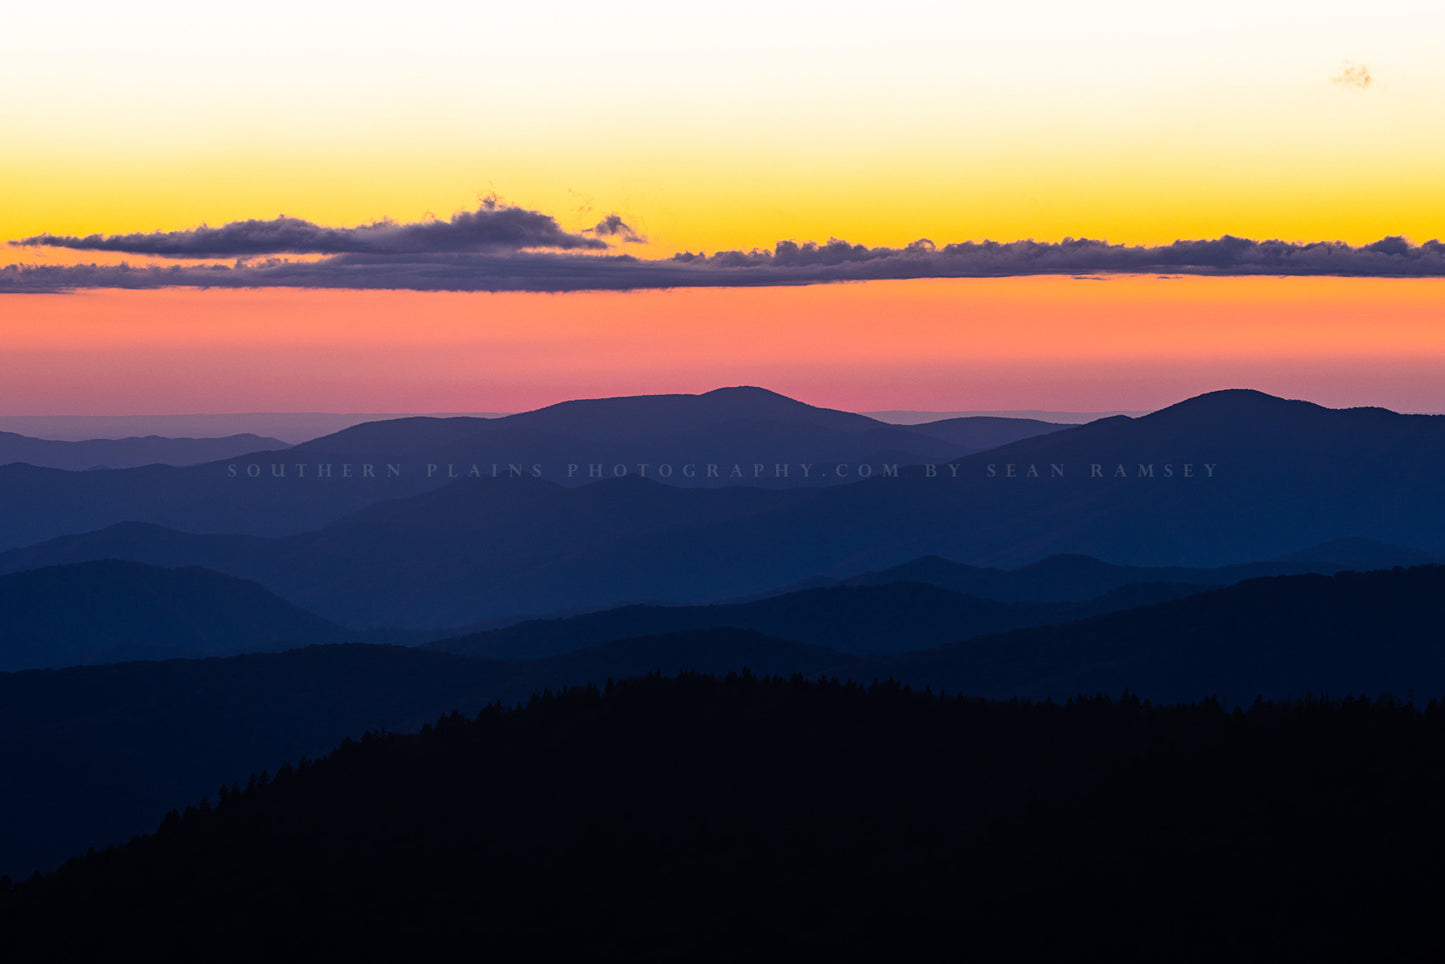 Landscape photography print of a scenic view of the Appalachian Mountains at sunset at Clingmans Dome in the Great Smoky Mountains of North Carolina by Sean Ramsey of Southern Plains Photography.